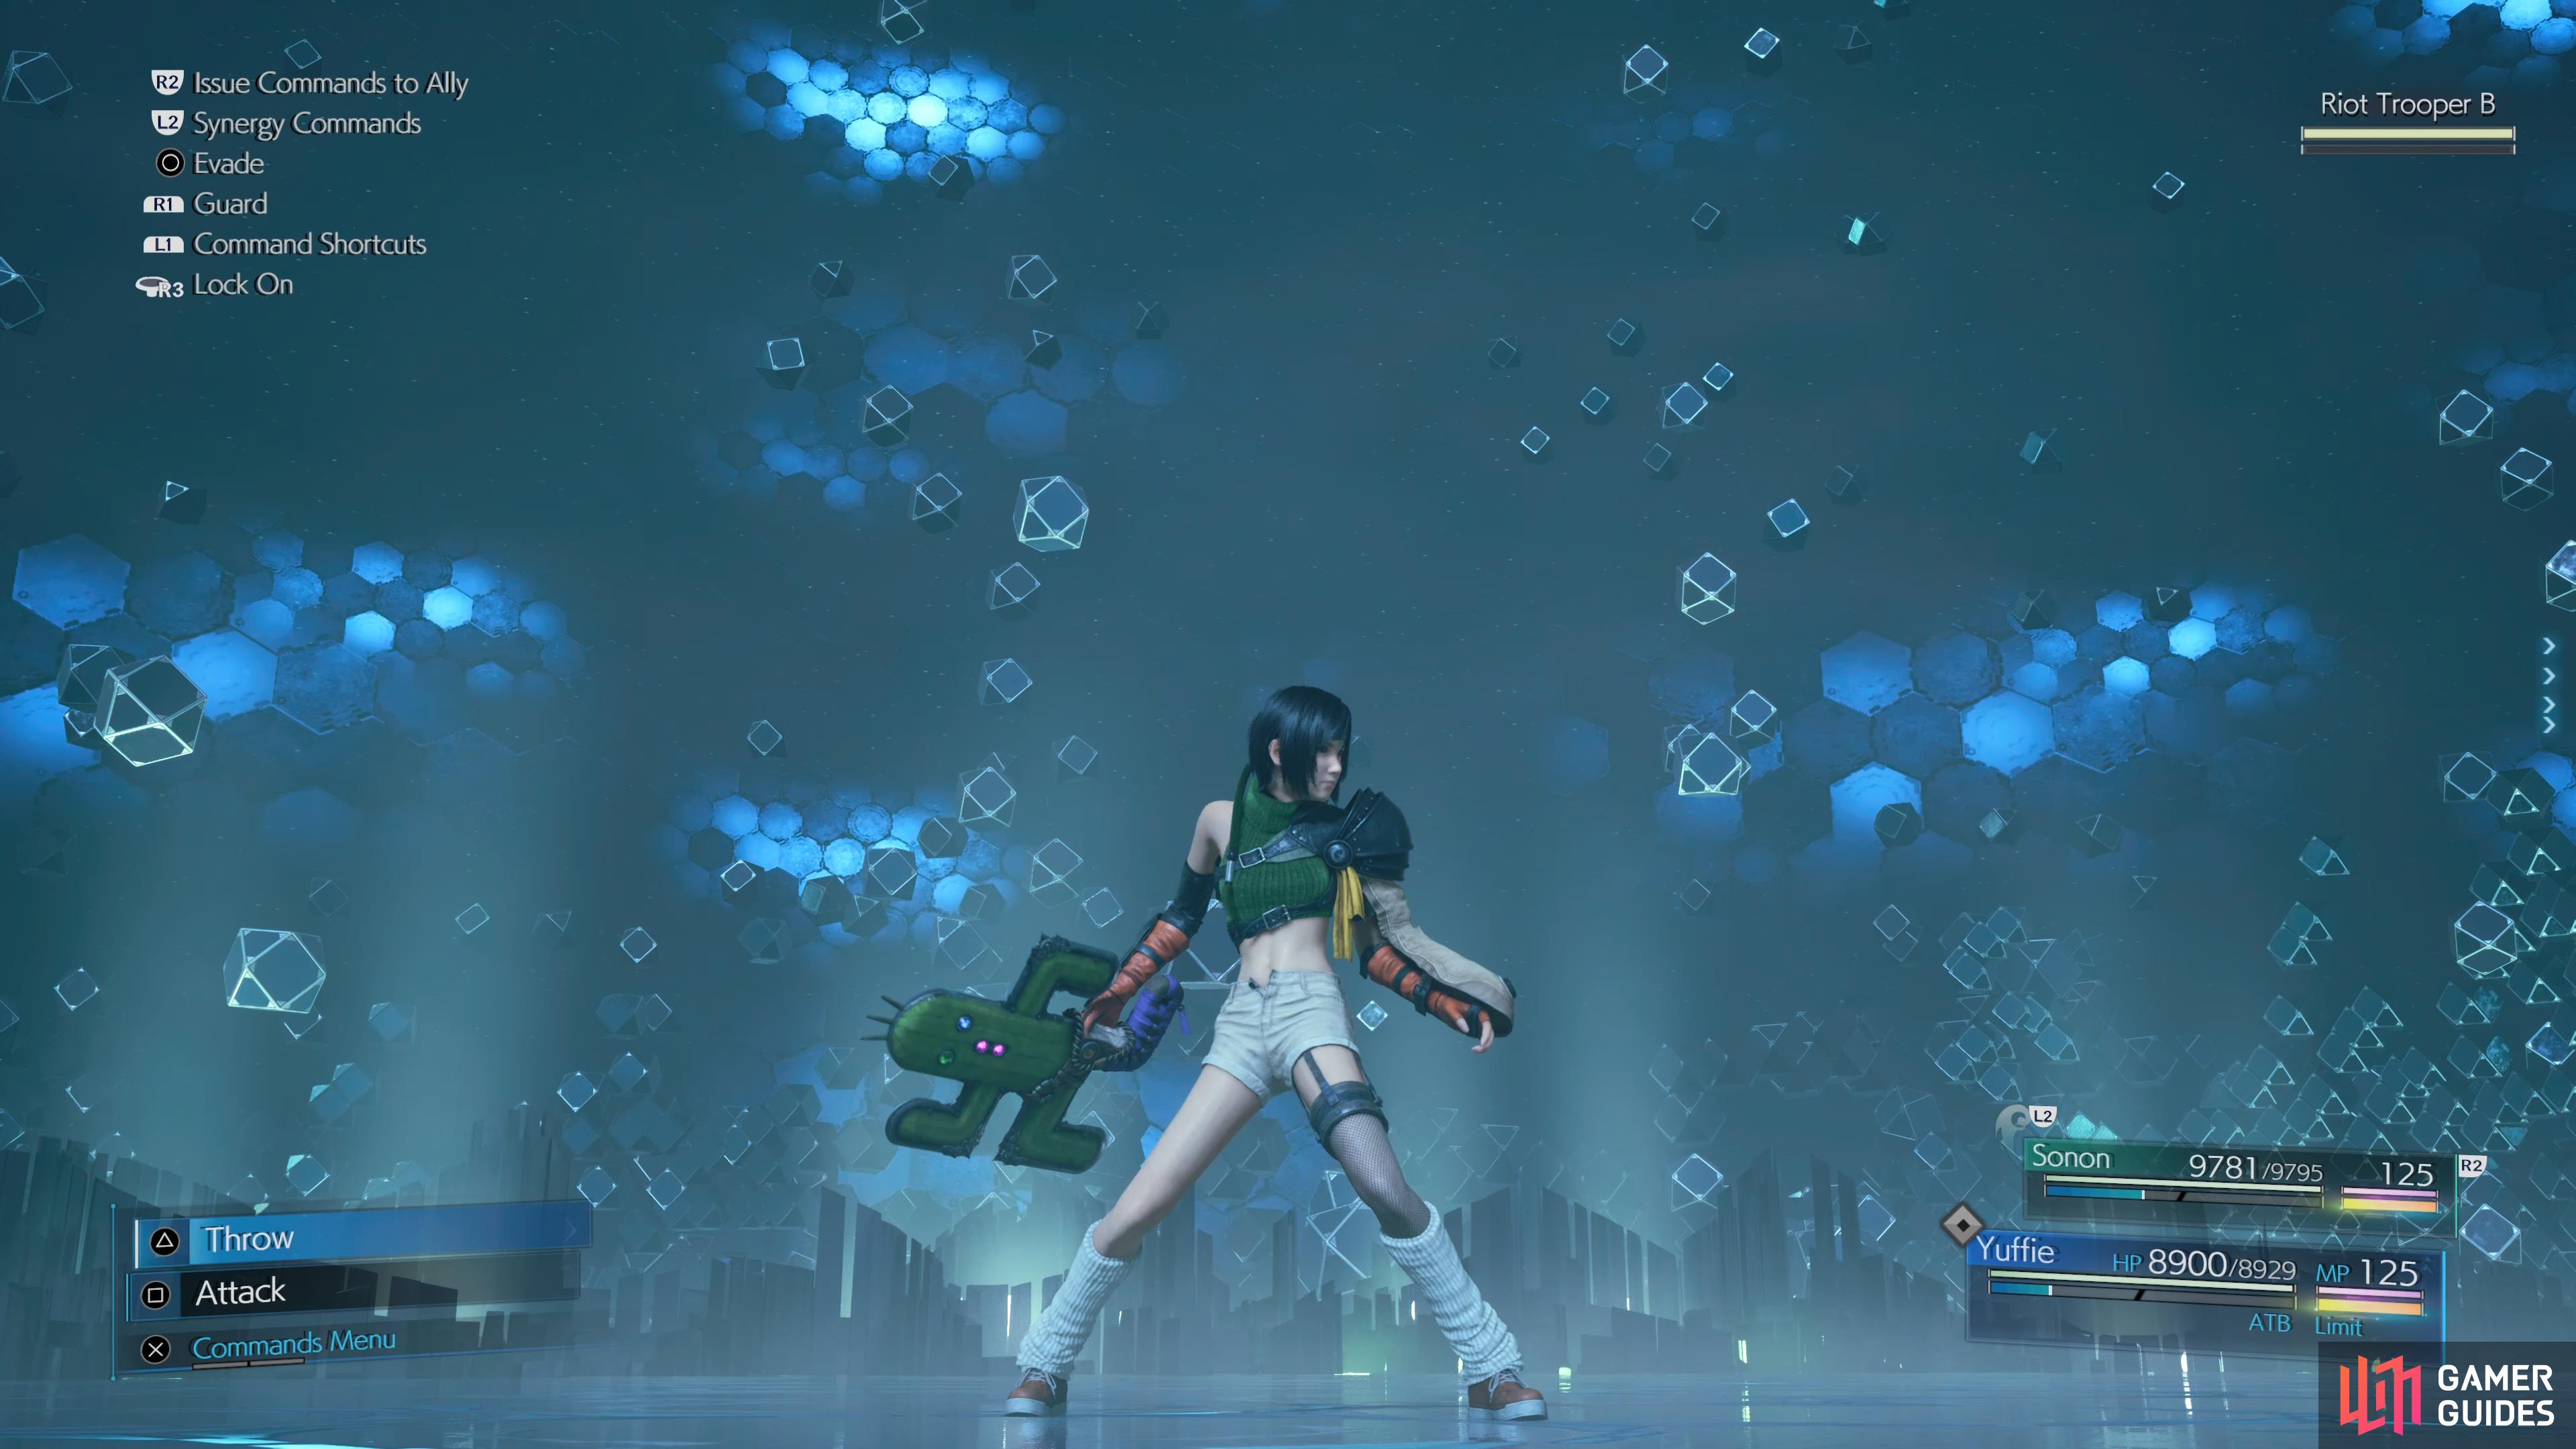 Yuffie’s Cacstar weapon is a DLC weapon, you cannot obtain it any other way.